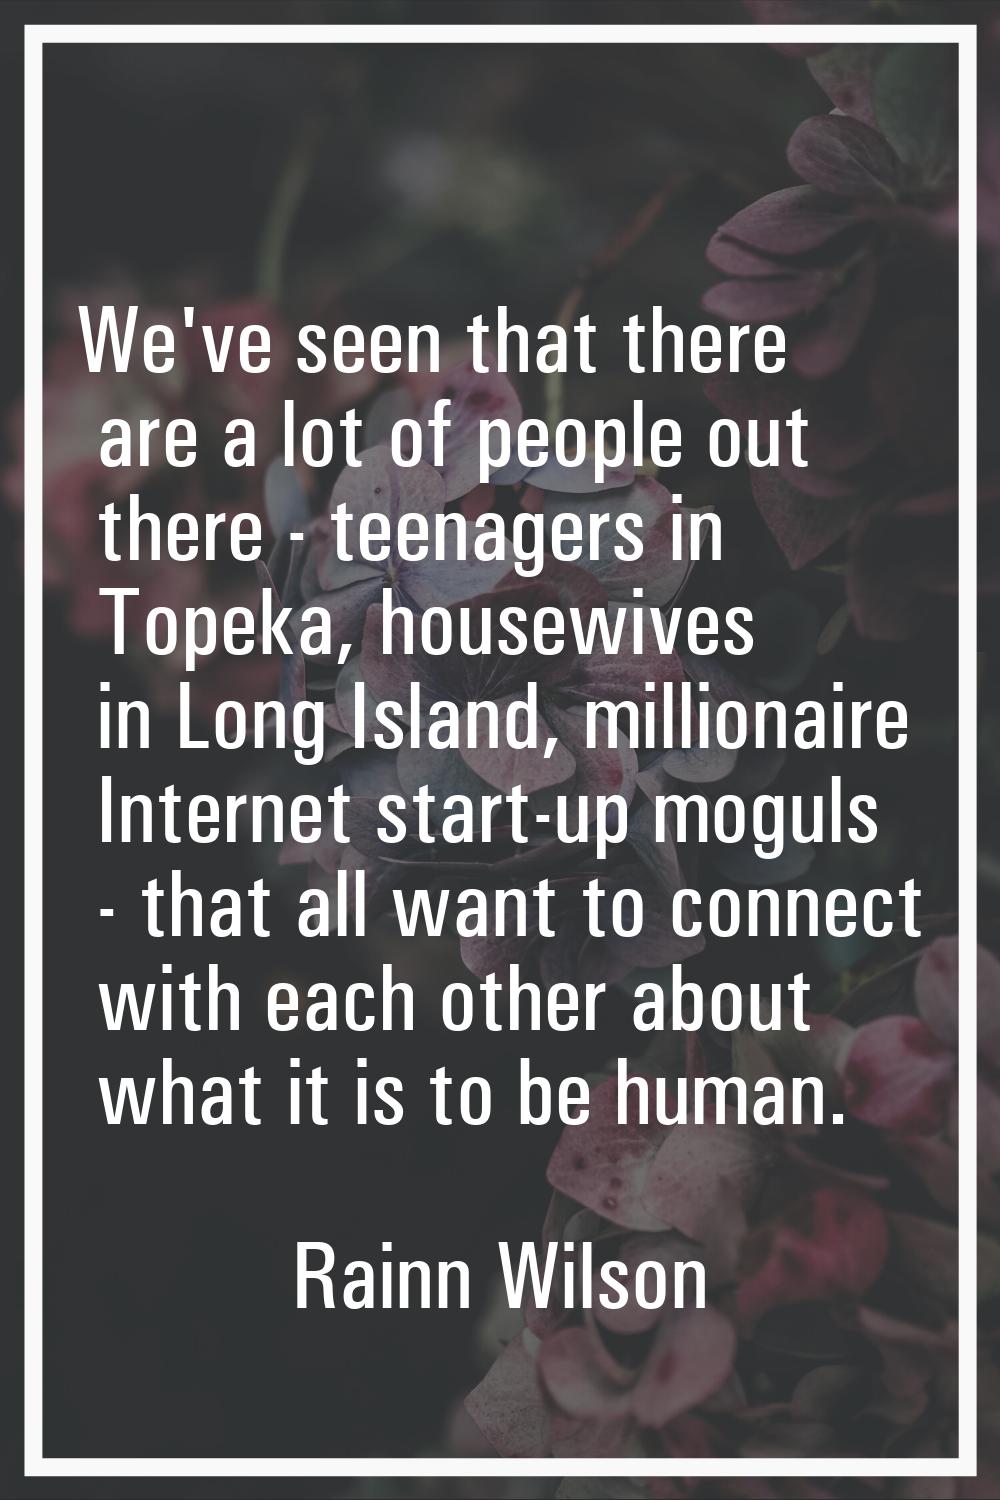 We've seen that there are a lot of people out there - teenagers in Topeka, housewives in Long Islan